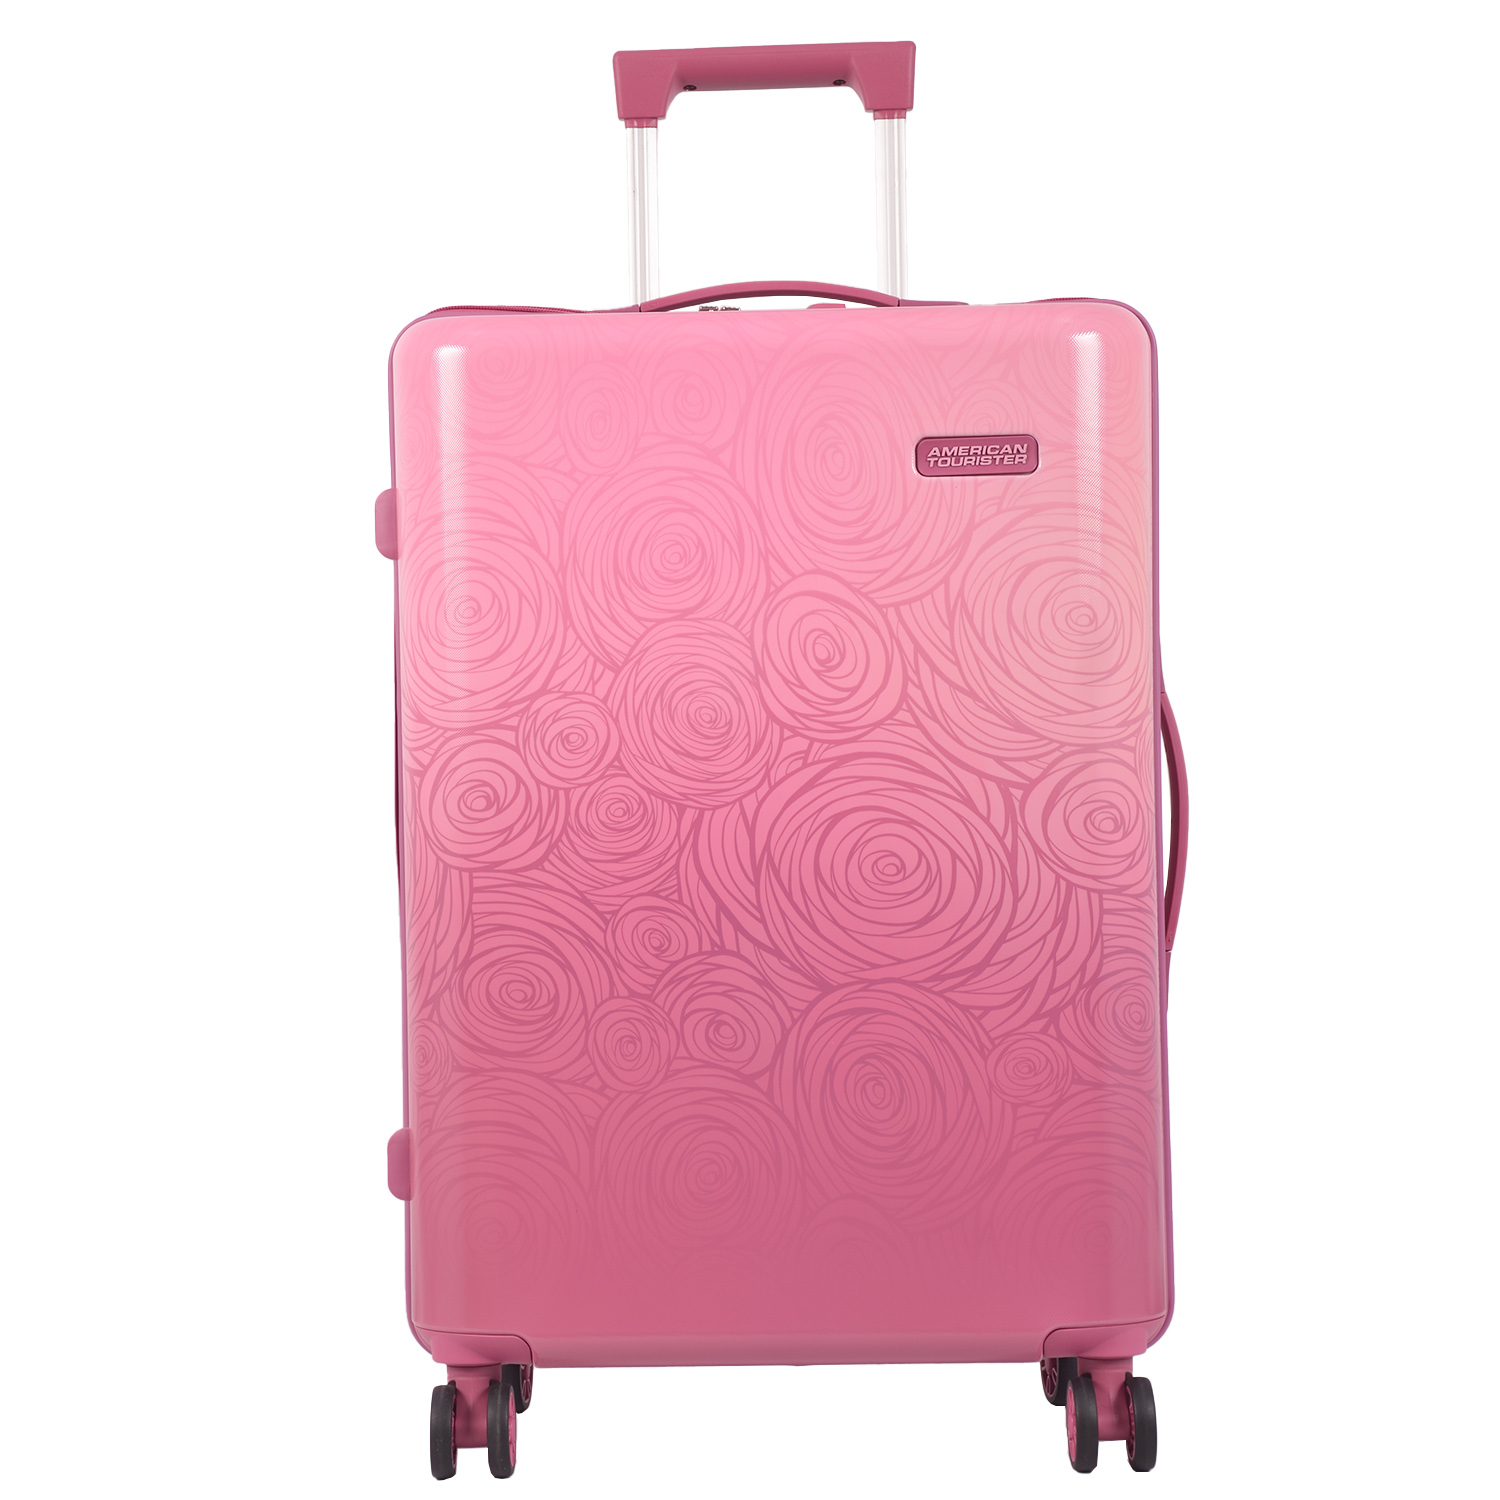 RoshanBags_AMERICAN TOURISTER VICENZA STROLLY PINK